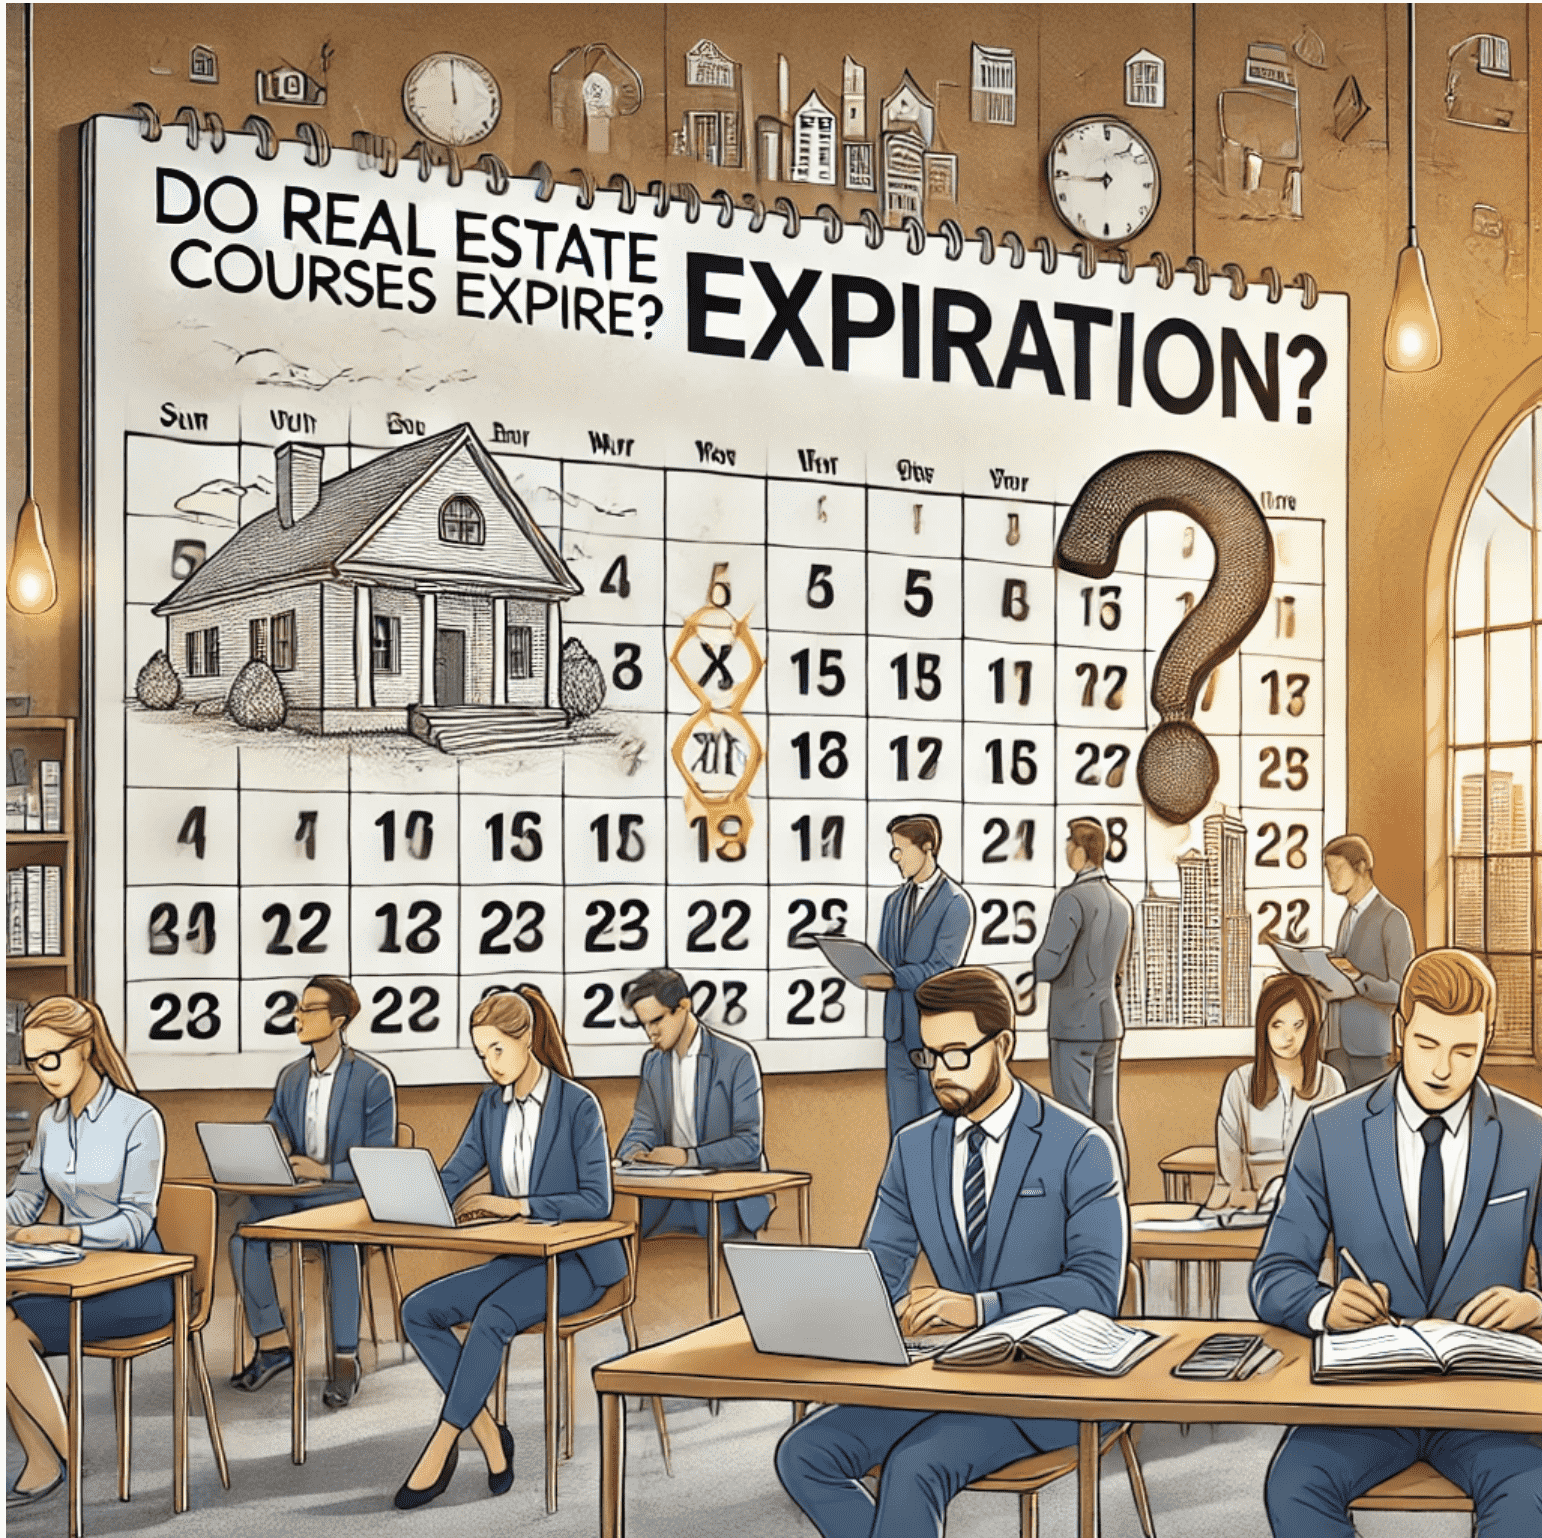 Do real estate courses expire image